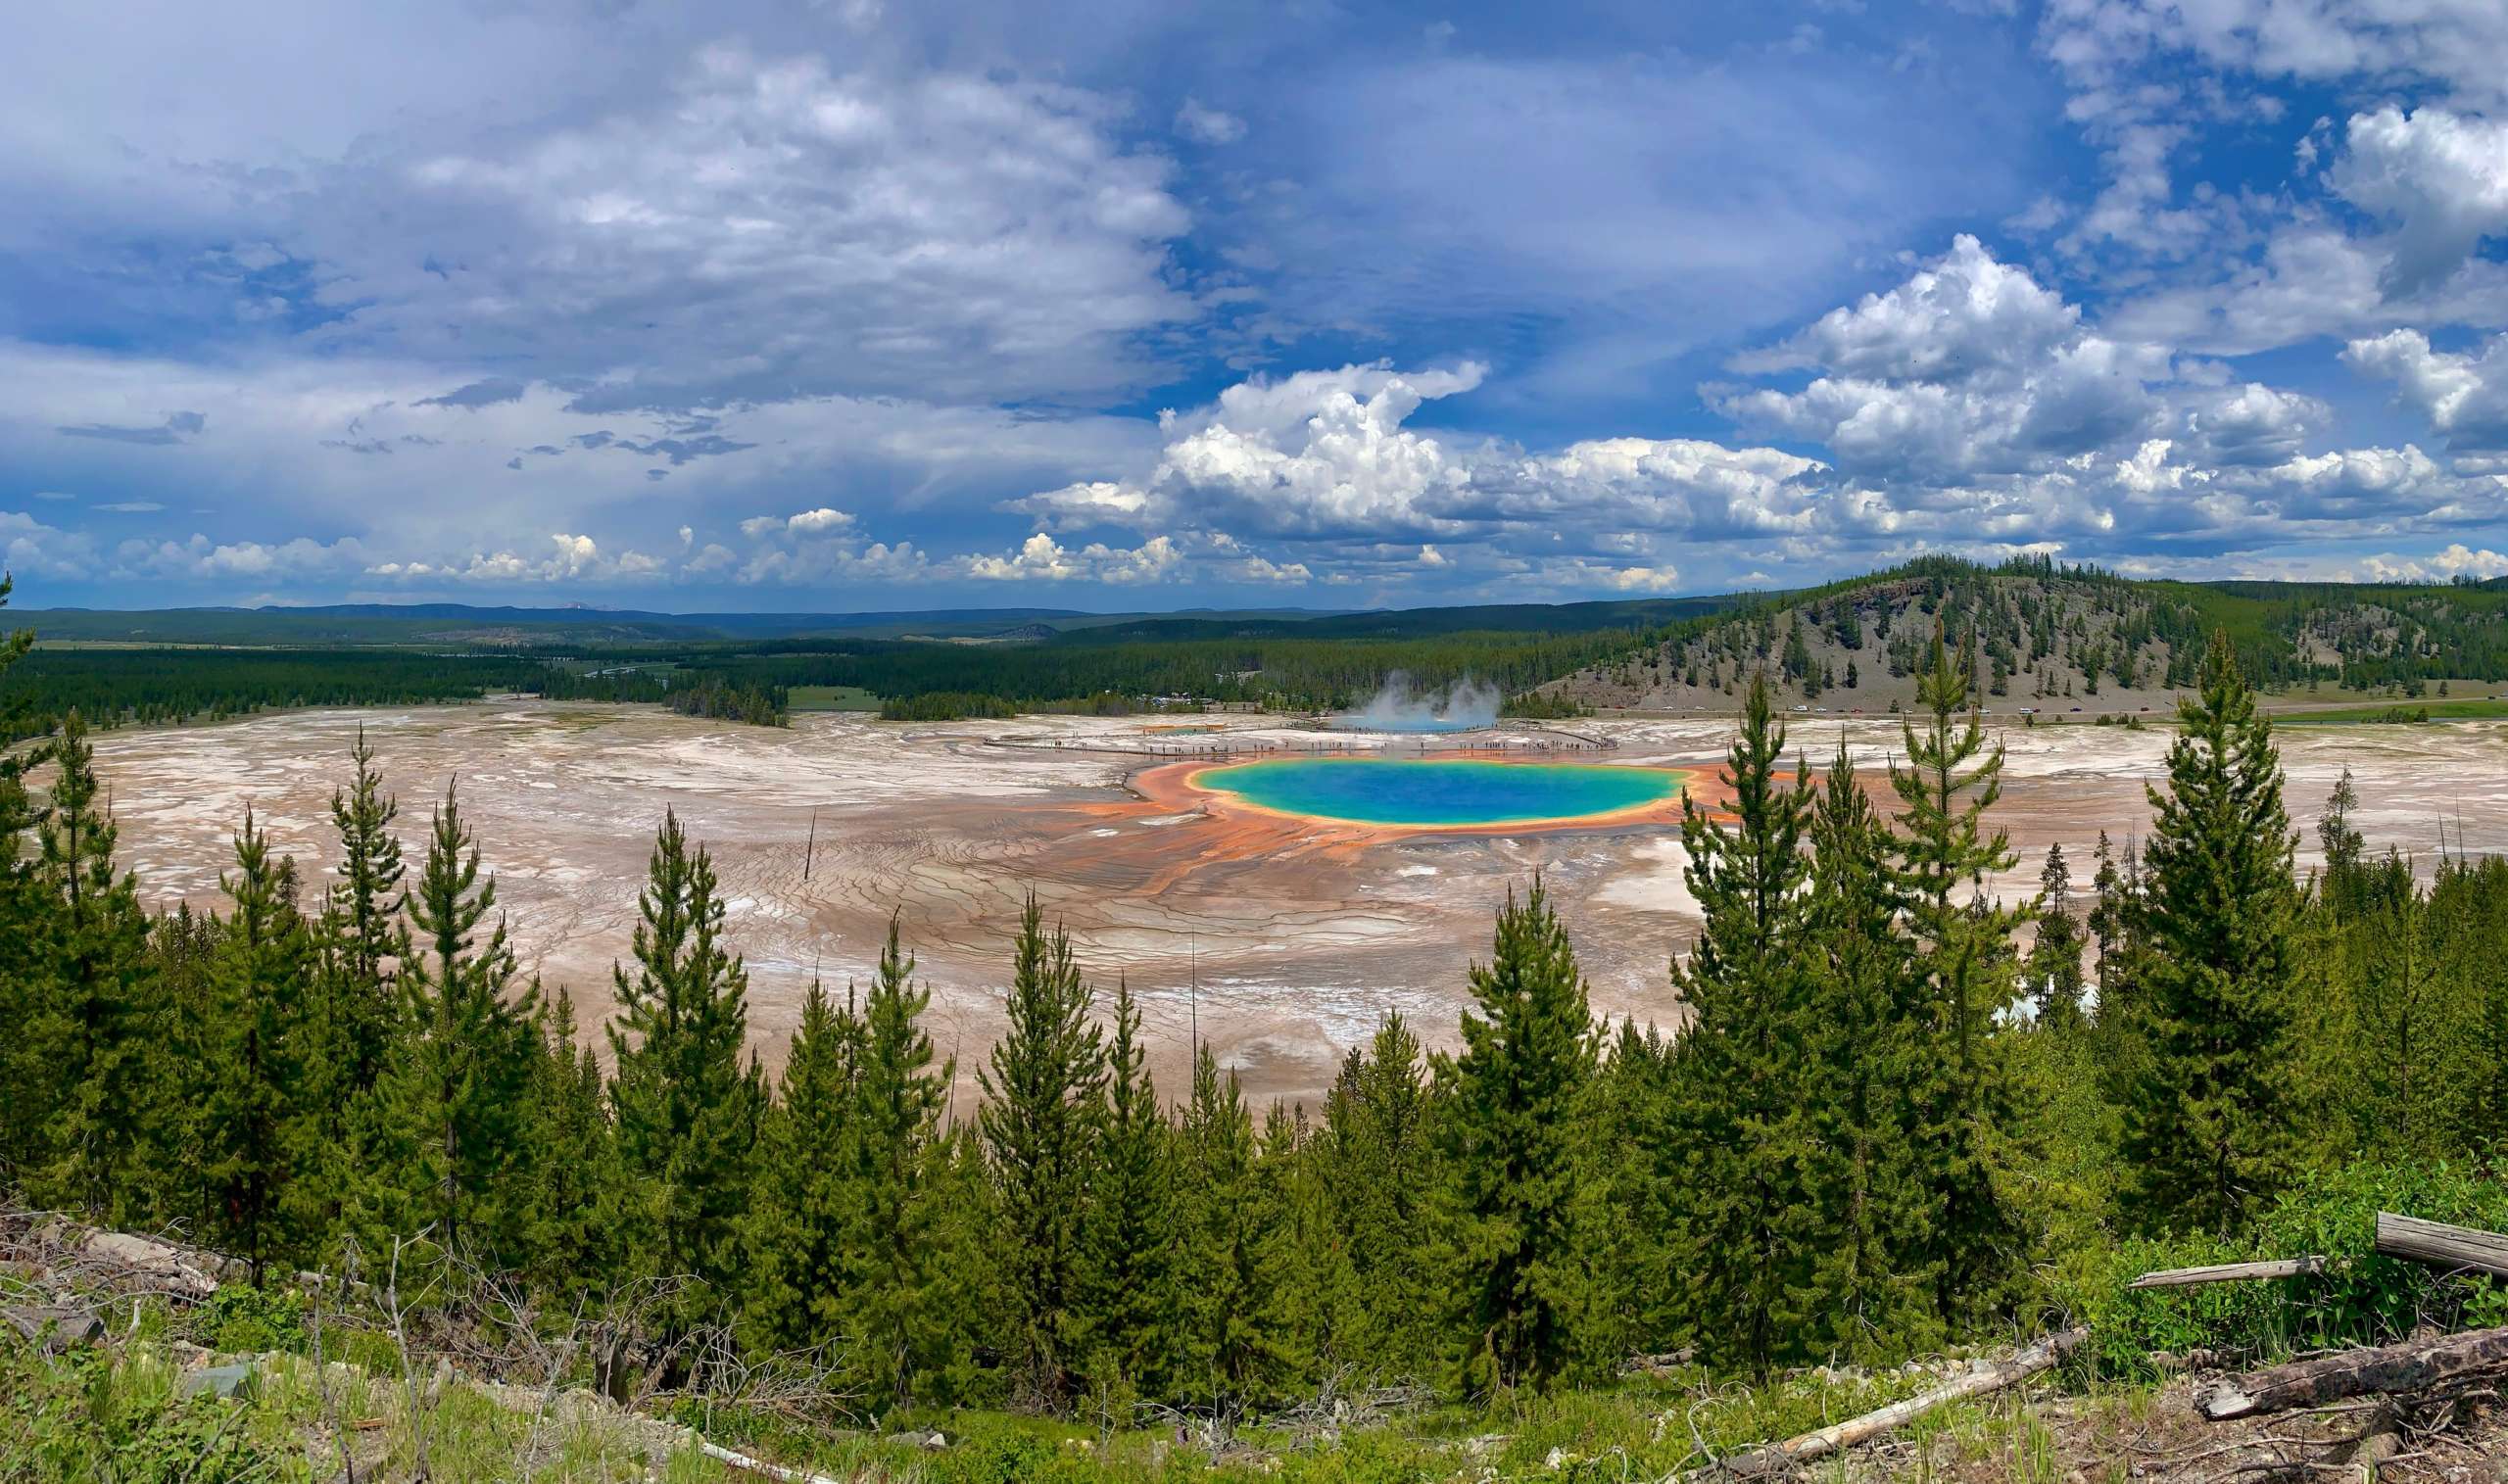 The Best 6-Day Yellowstone Itinerary